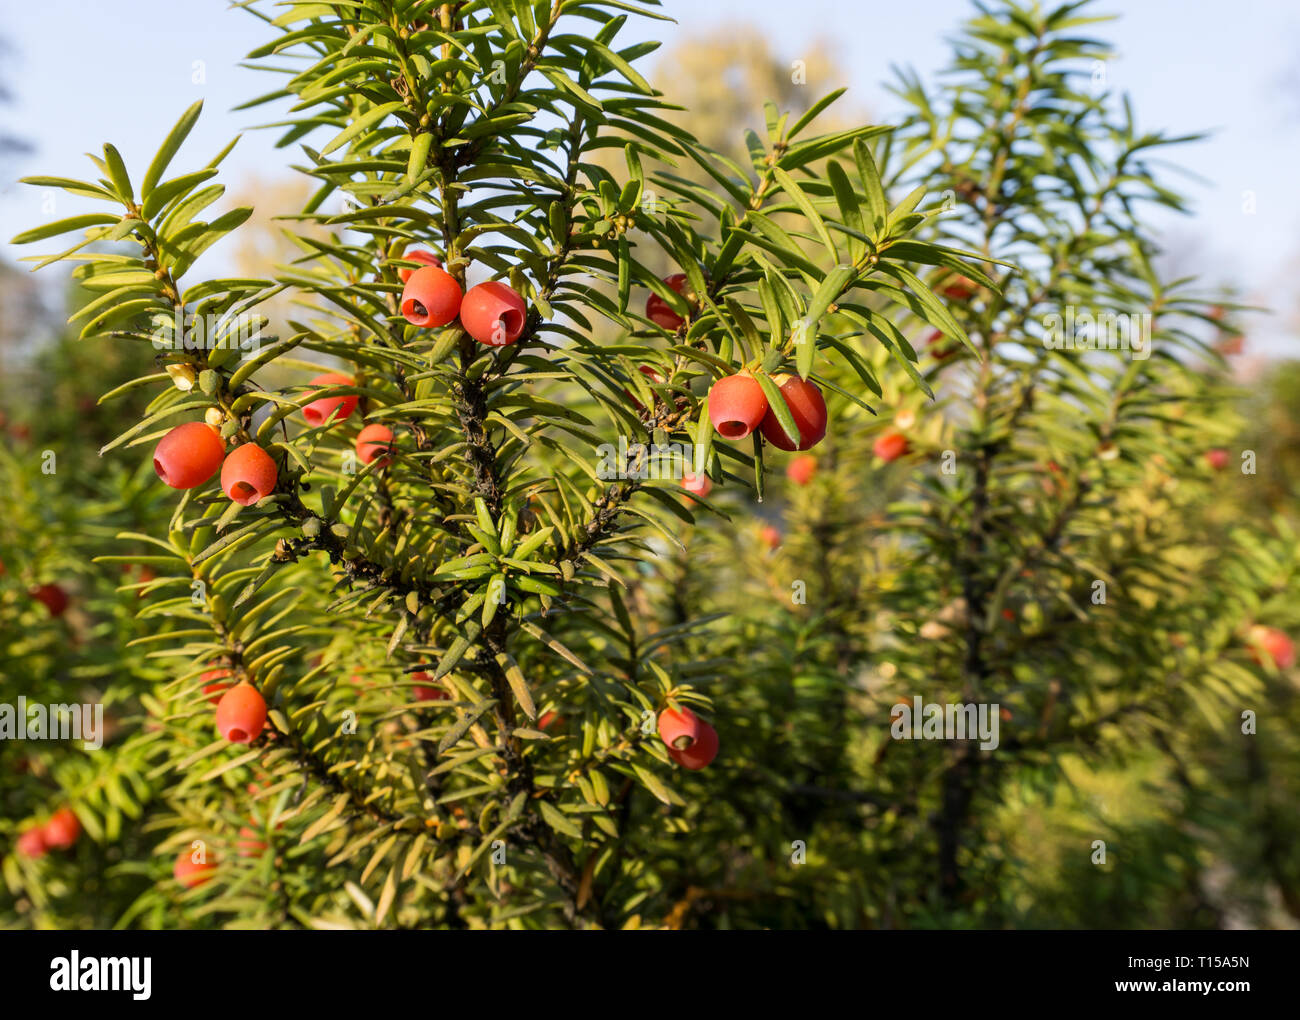 Taxus baccata (European yew) shoot with mature cones Stock Photo